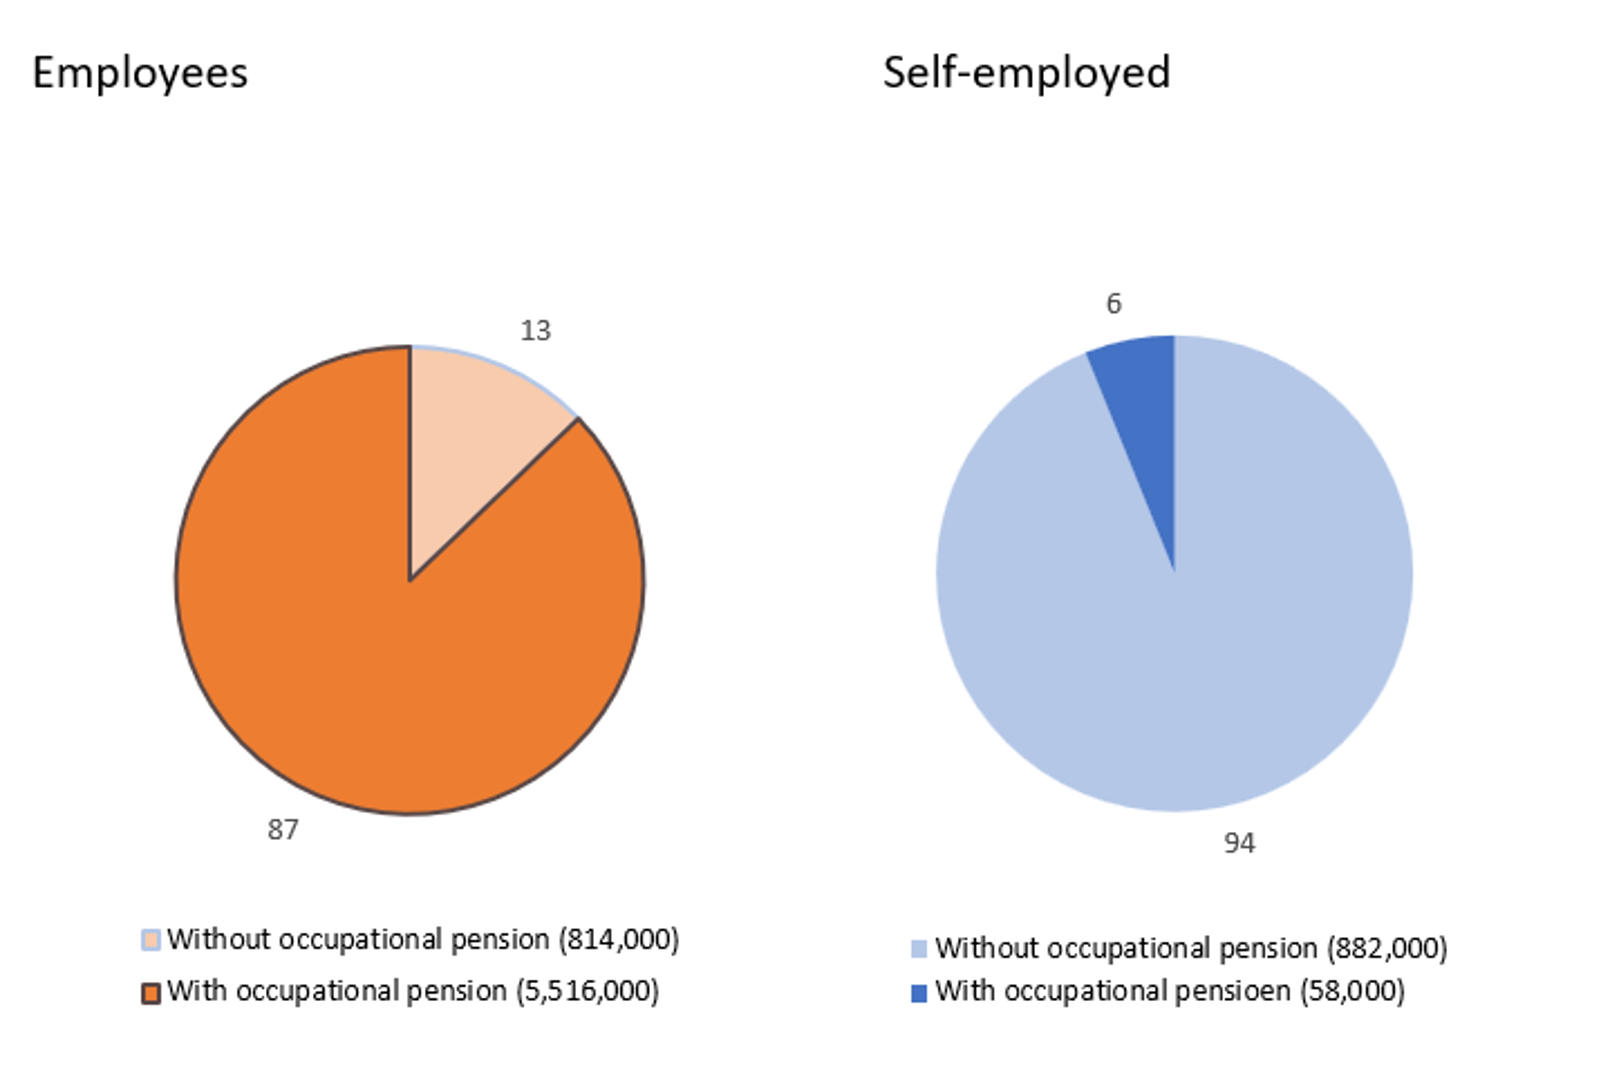 Percentage employees and self-employed with occupational pension in 2020